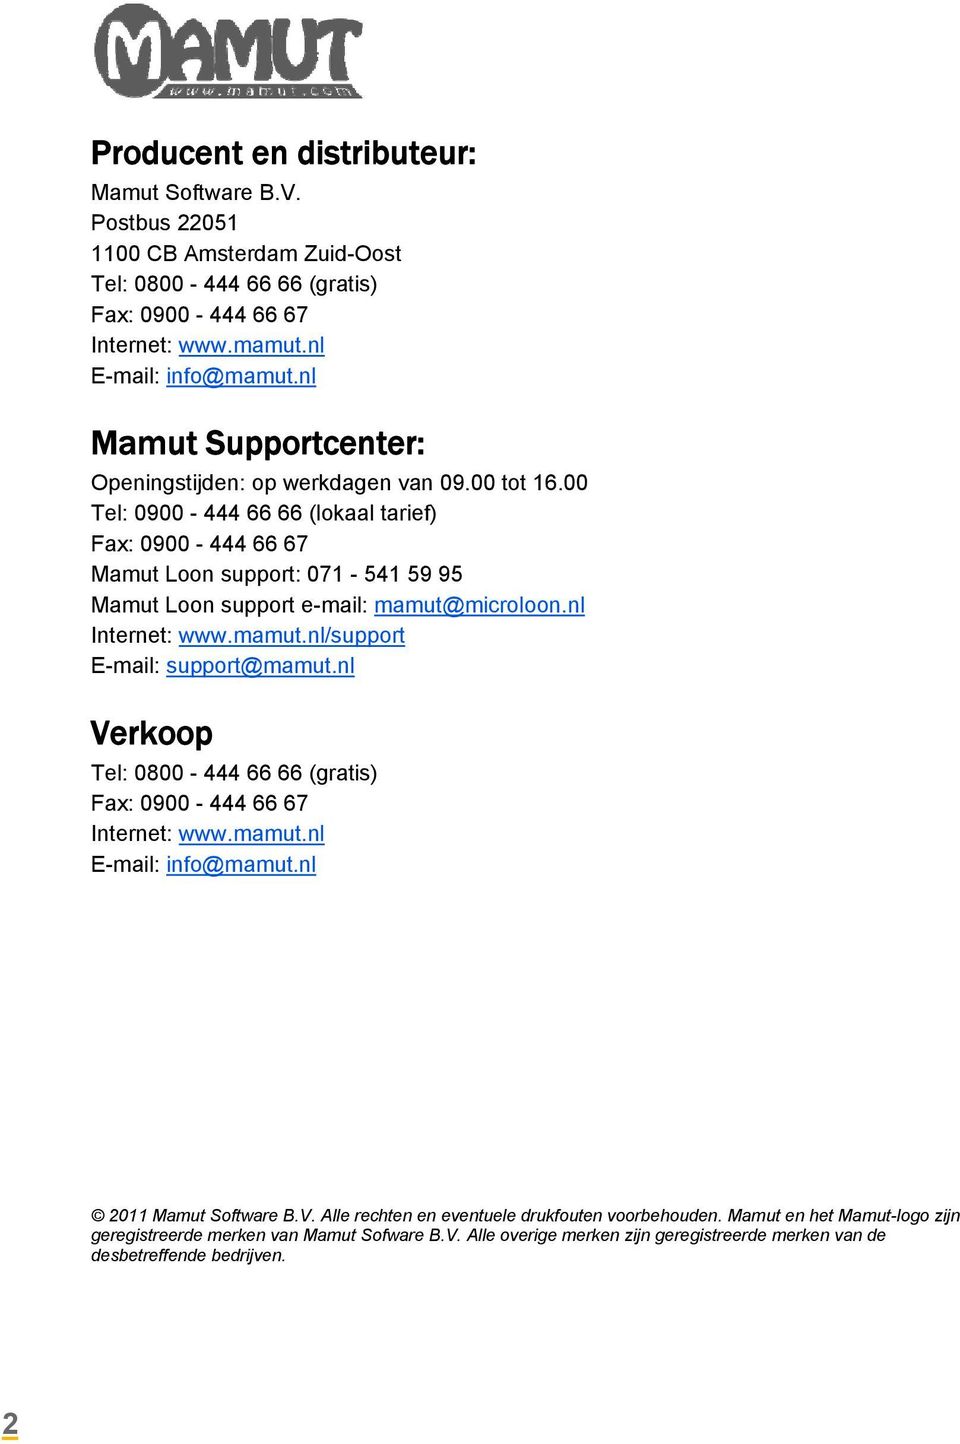 00 Tel: 0900-444 66 66 (lokaal tarief) Fax: 0900-444 66 67 Mamut Loon support: 071-541 59 95 Mamut Loon support e-mail: mamut@microloon.nl Internet: www.mamut.nl/support E-mail: support@mamut.